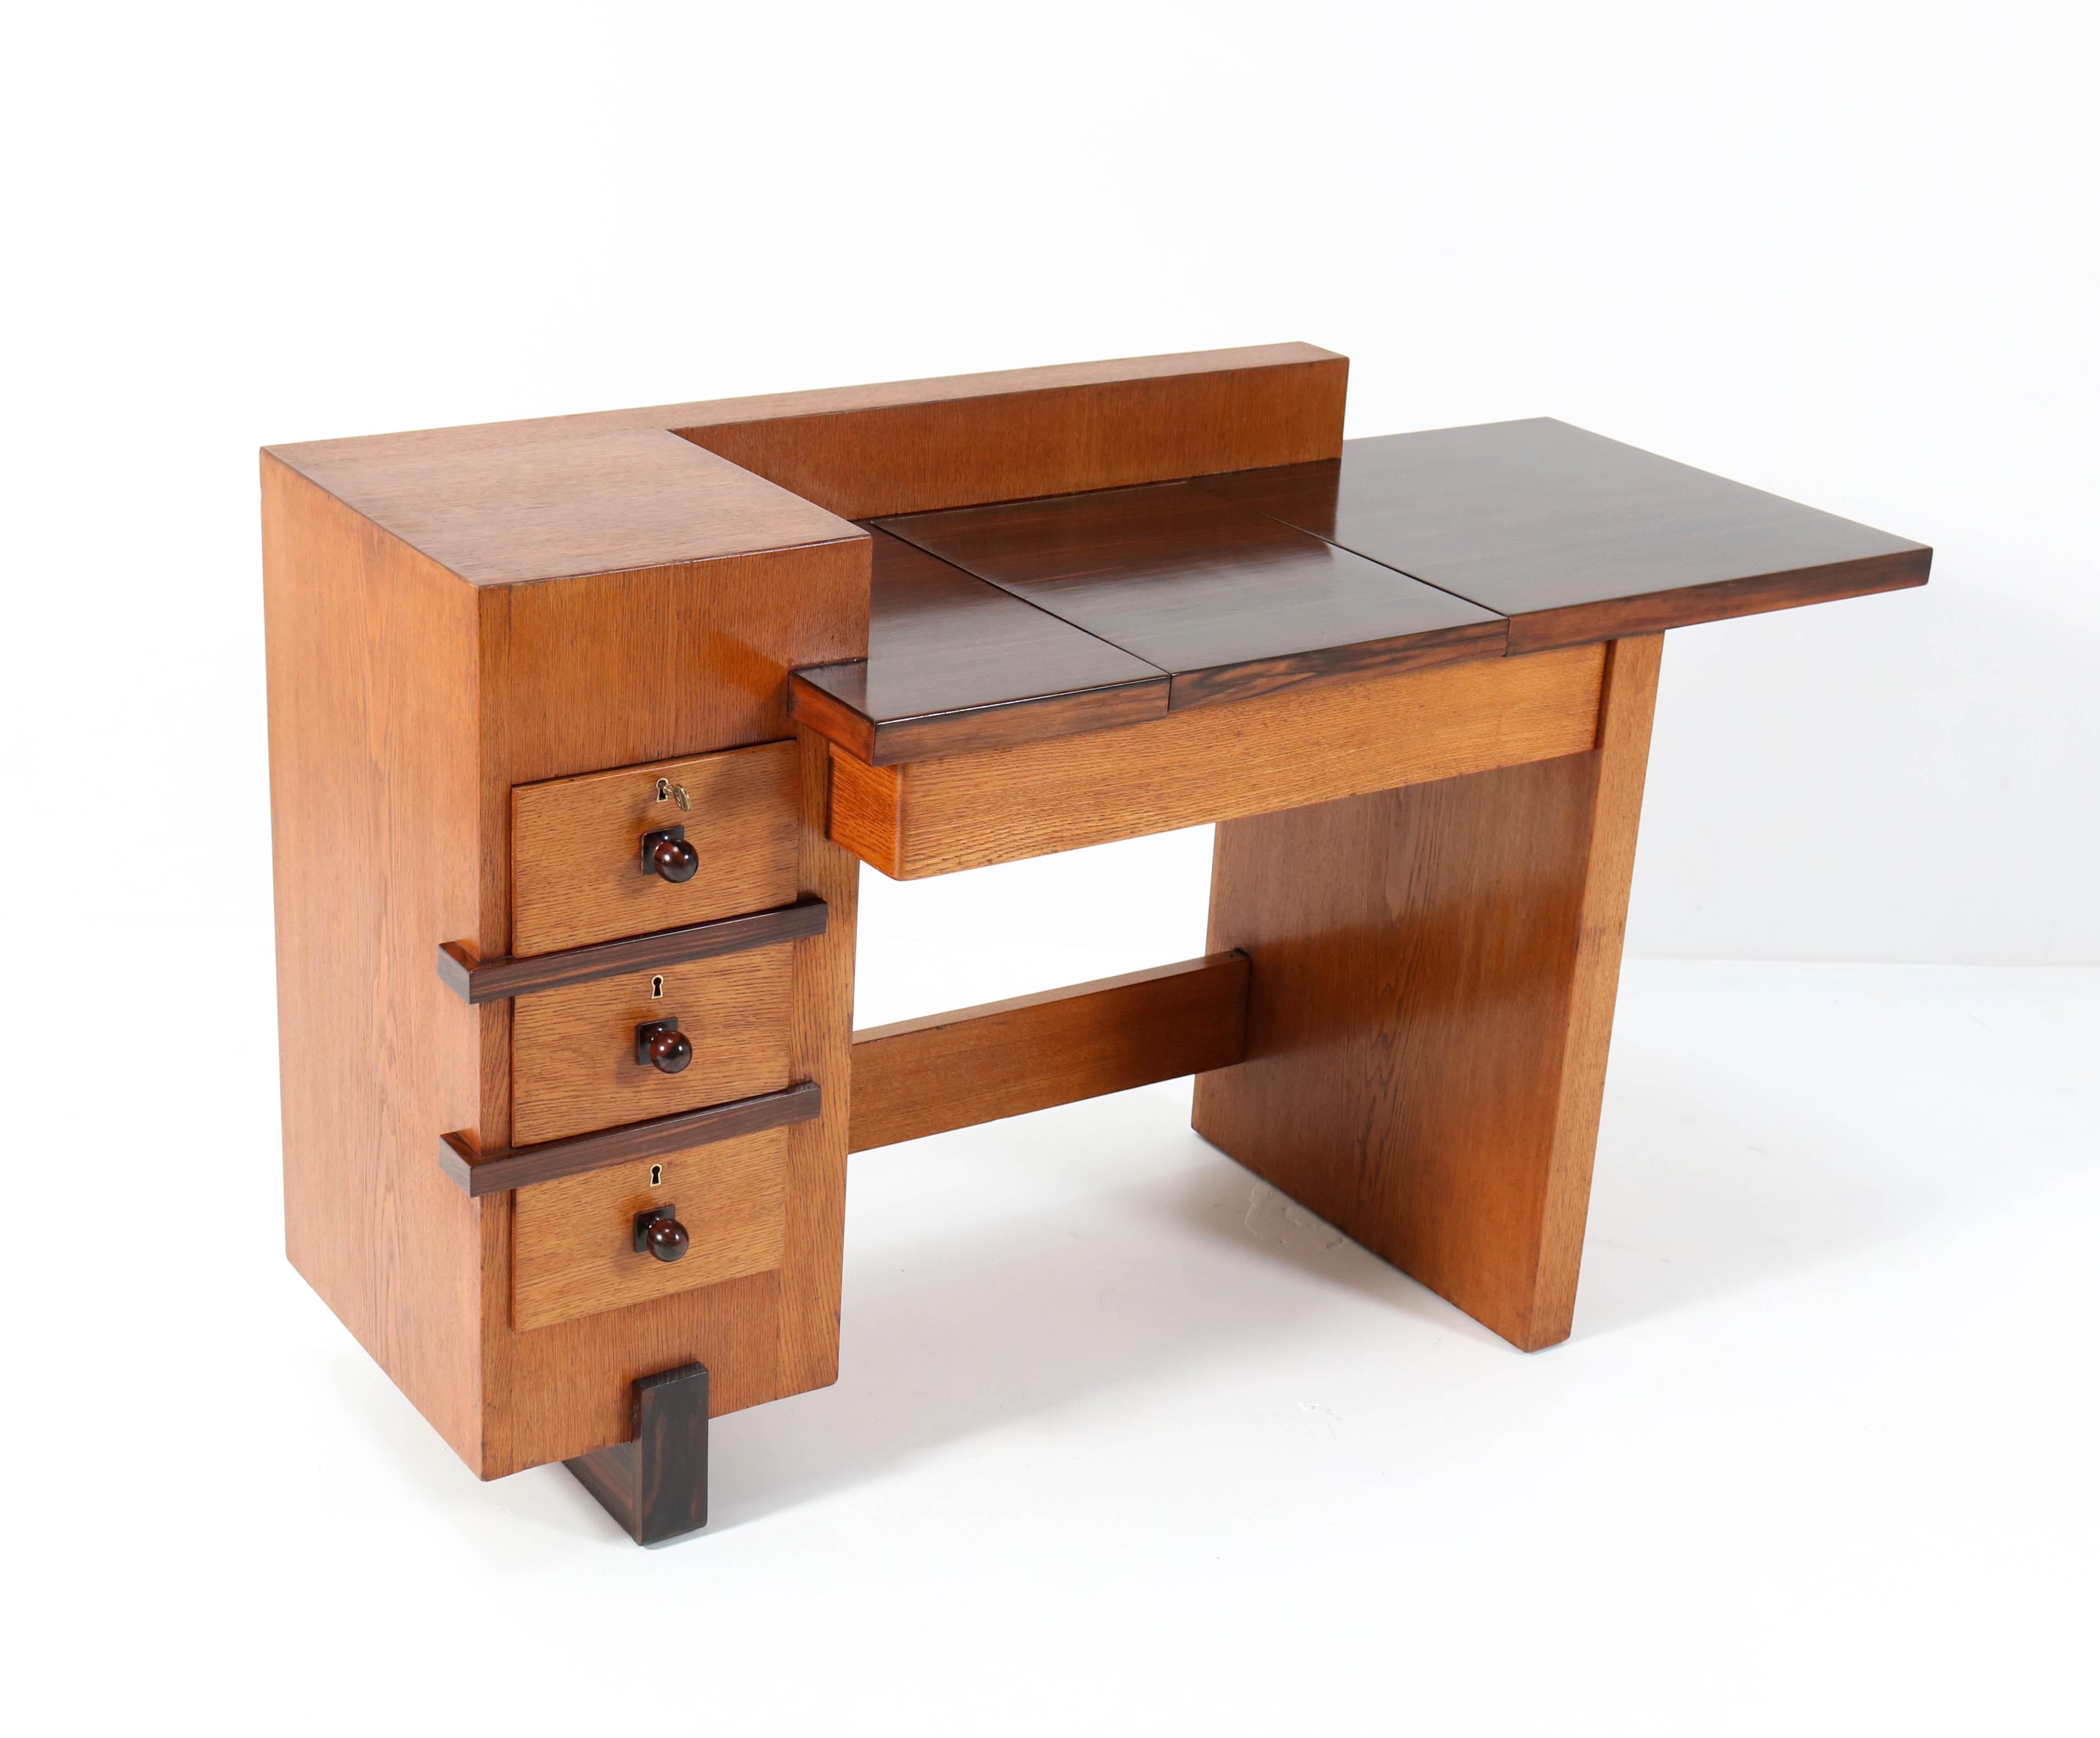 Oak Art Deco Modernist Writing Table by Hendrik Wouda for Pander, 1924 In Good Condition For Sale In Amsterdam, NL